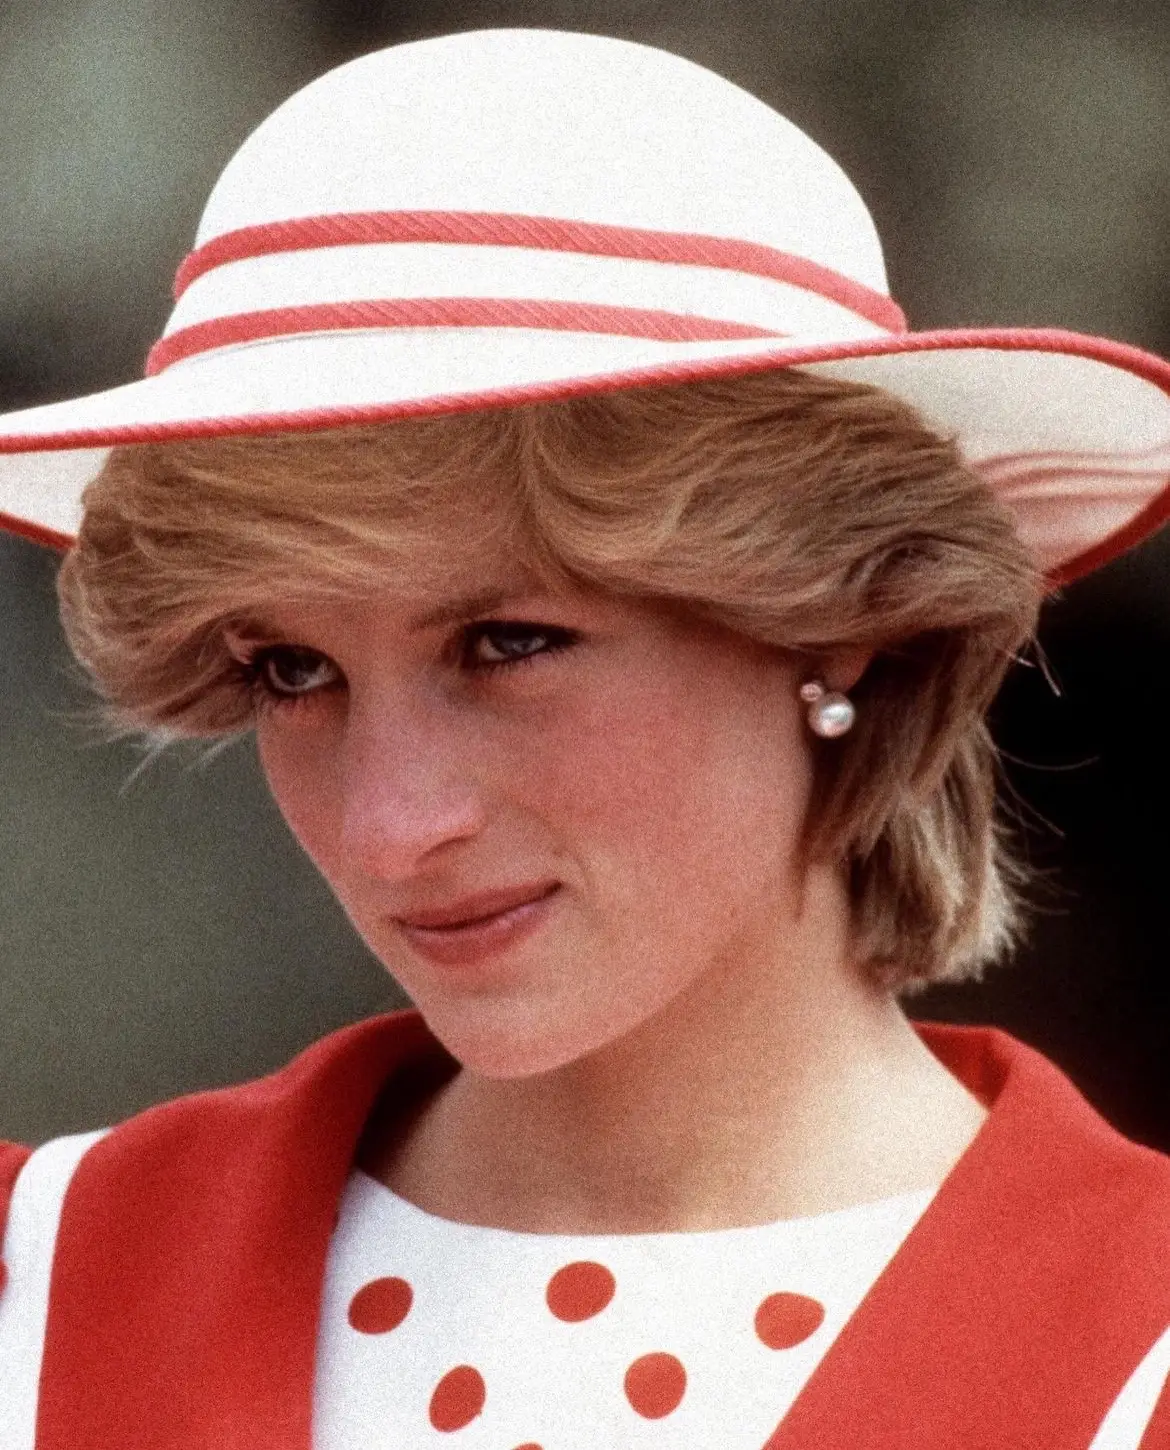 Diana, Princess of Wales, whilst attending the Festival of Youth at King George V park, Newfoundland, Canada, 23 June, 1983 #fyp #viral #royalfamily #royals #princessdiana #princessofwales #fypage